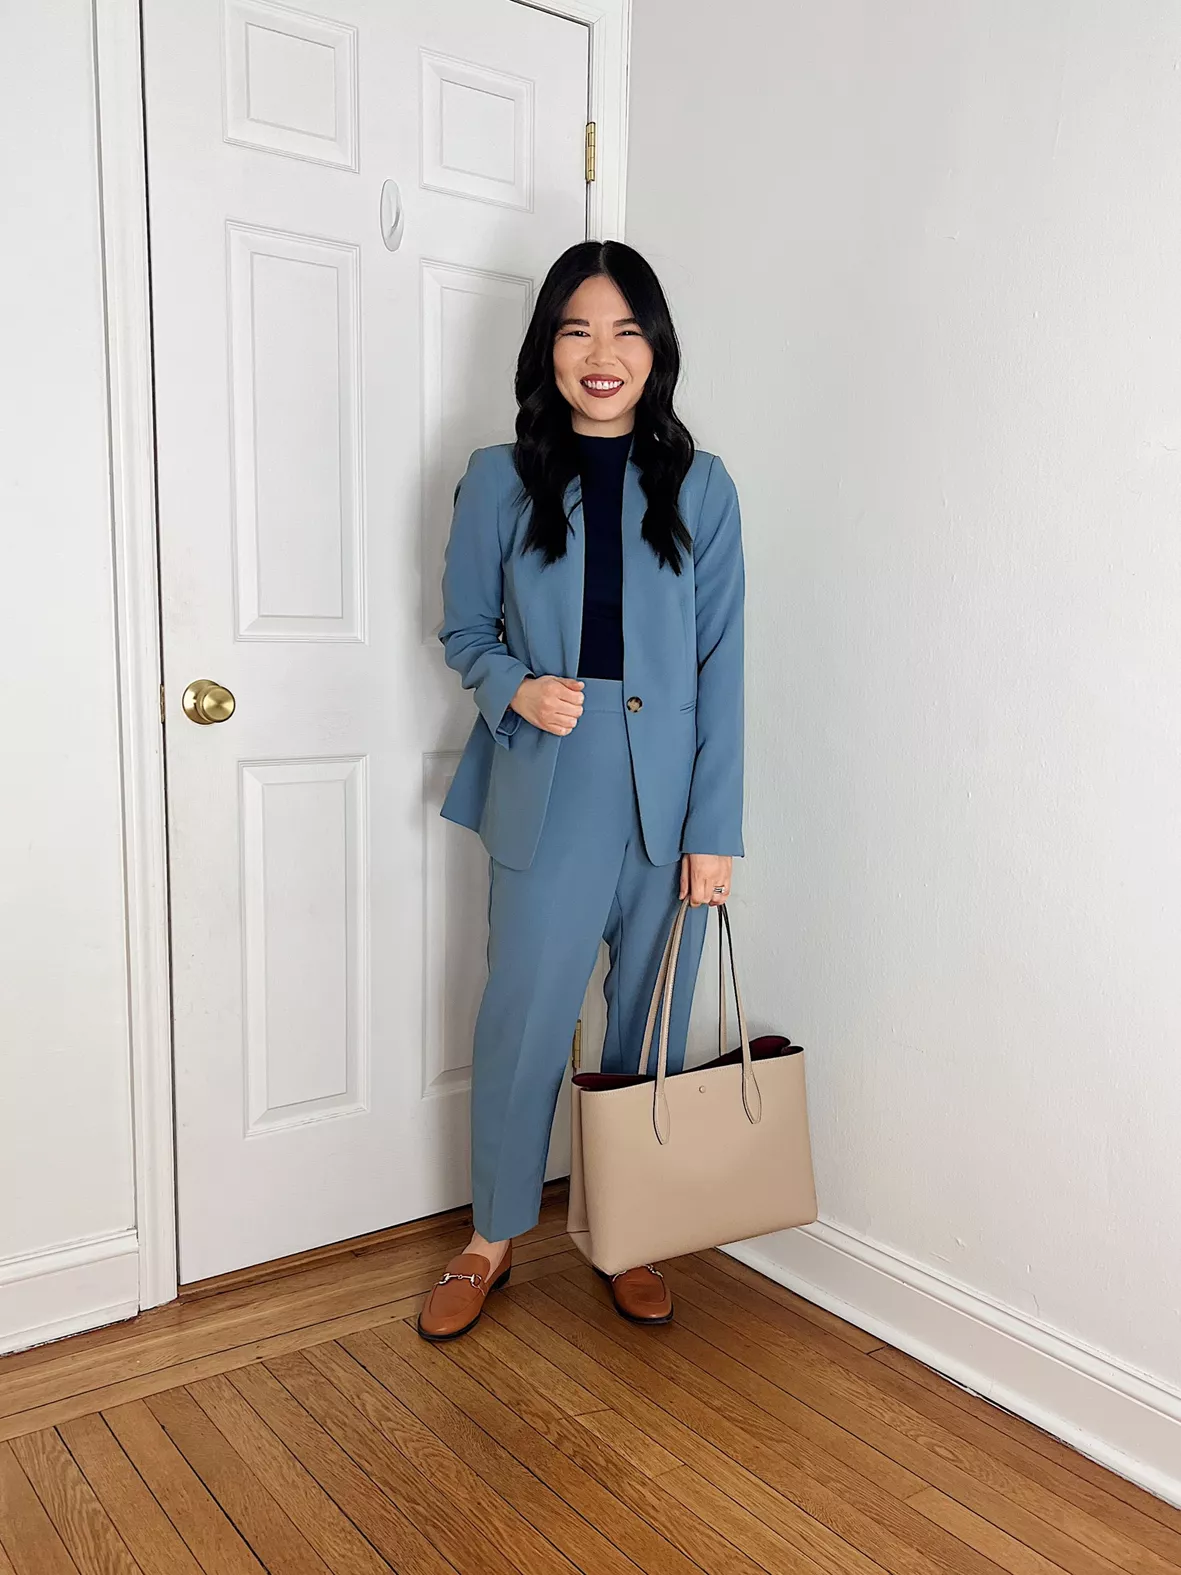 Light Blue Suit Outfits For Women (2 ideas & outfits)